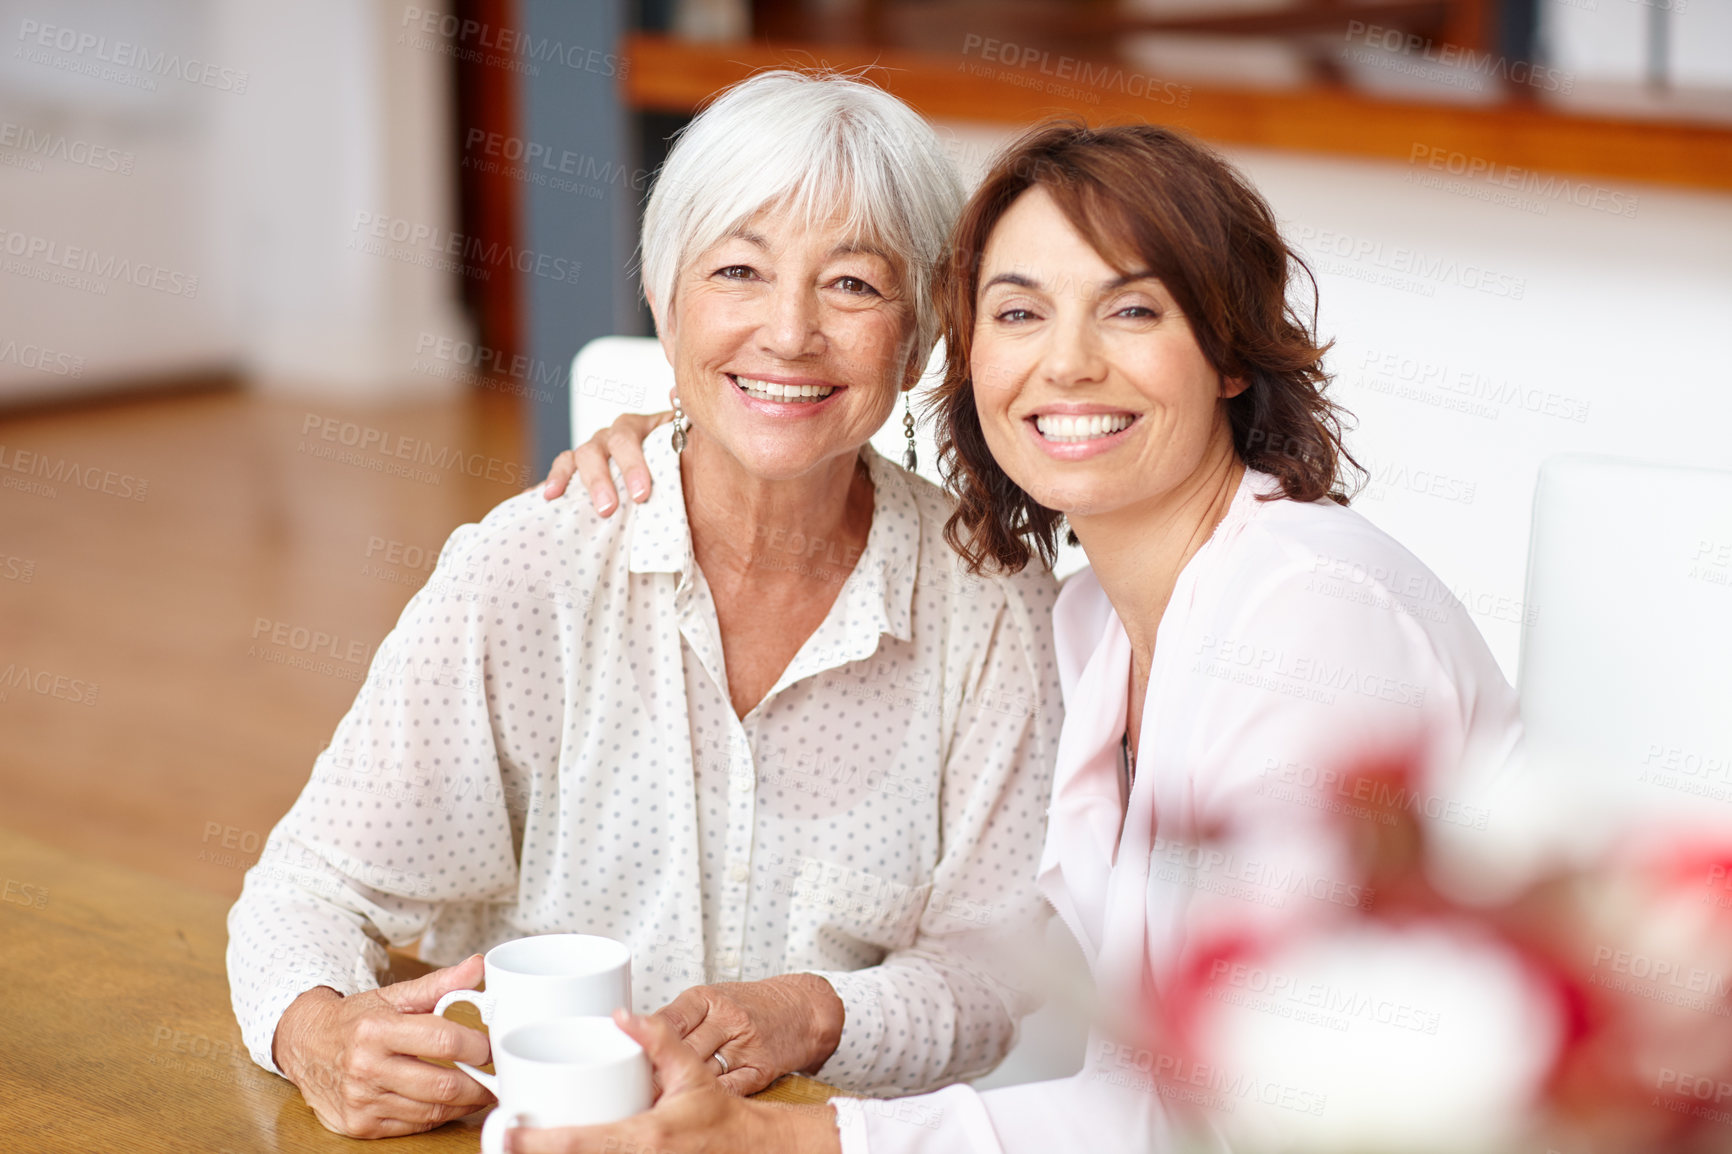 Buy stock photo Shot of a woman spending time with her elderly mother